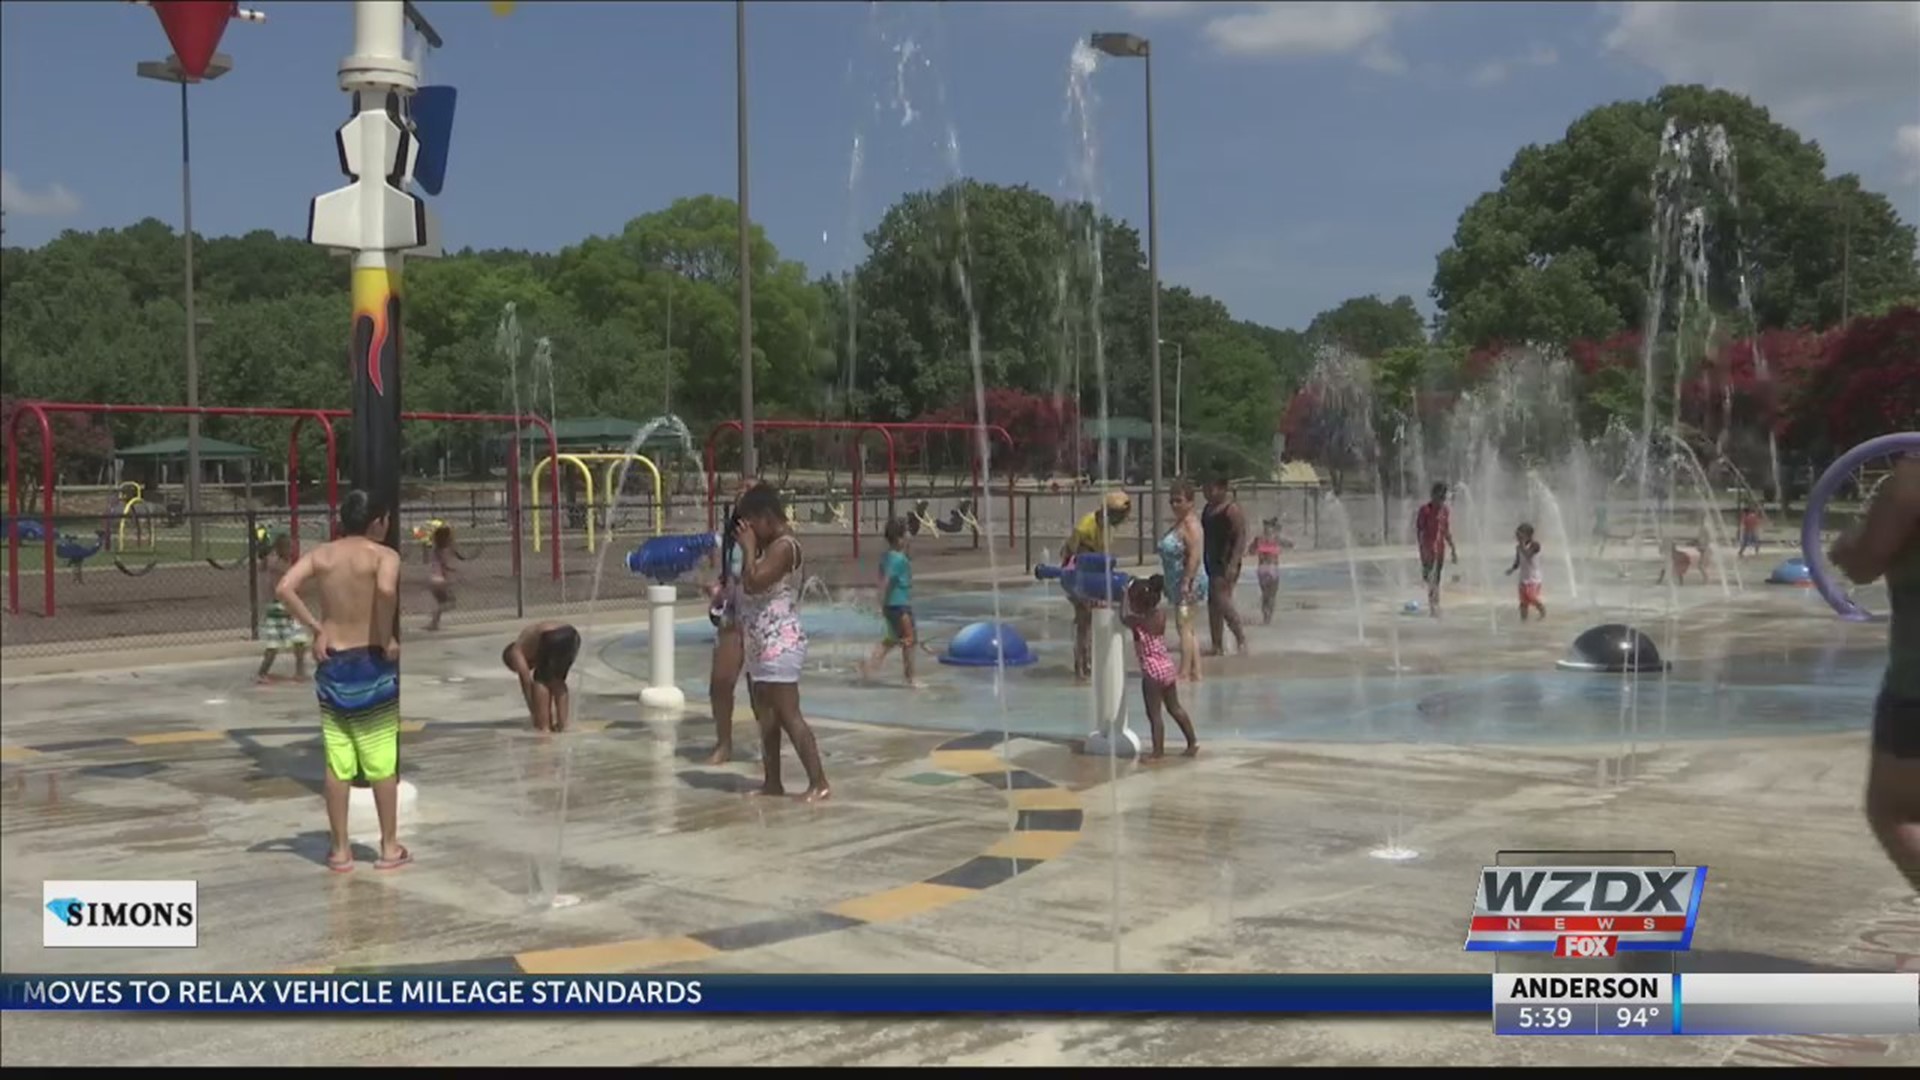 With a heat advisory and intense summer temperatures, people in Huntsville are finding fun ways to beat the heat.